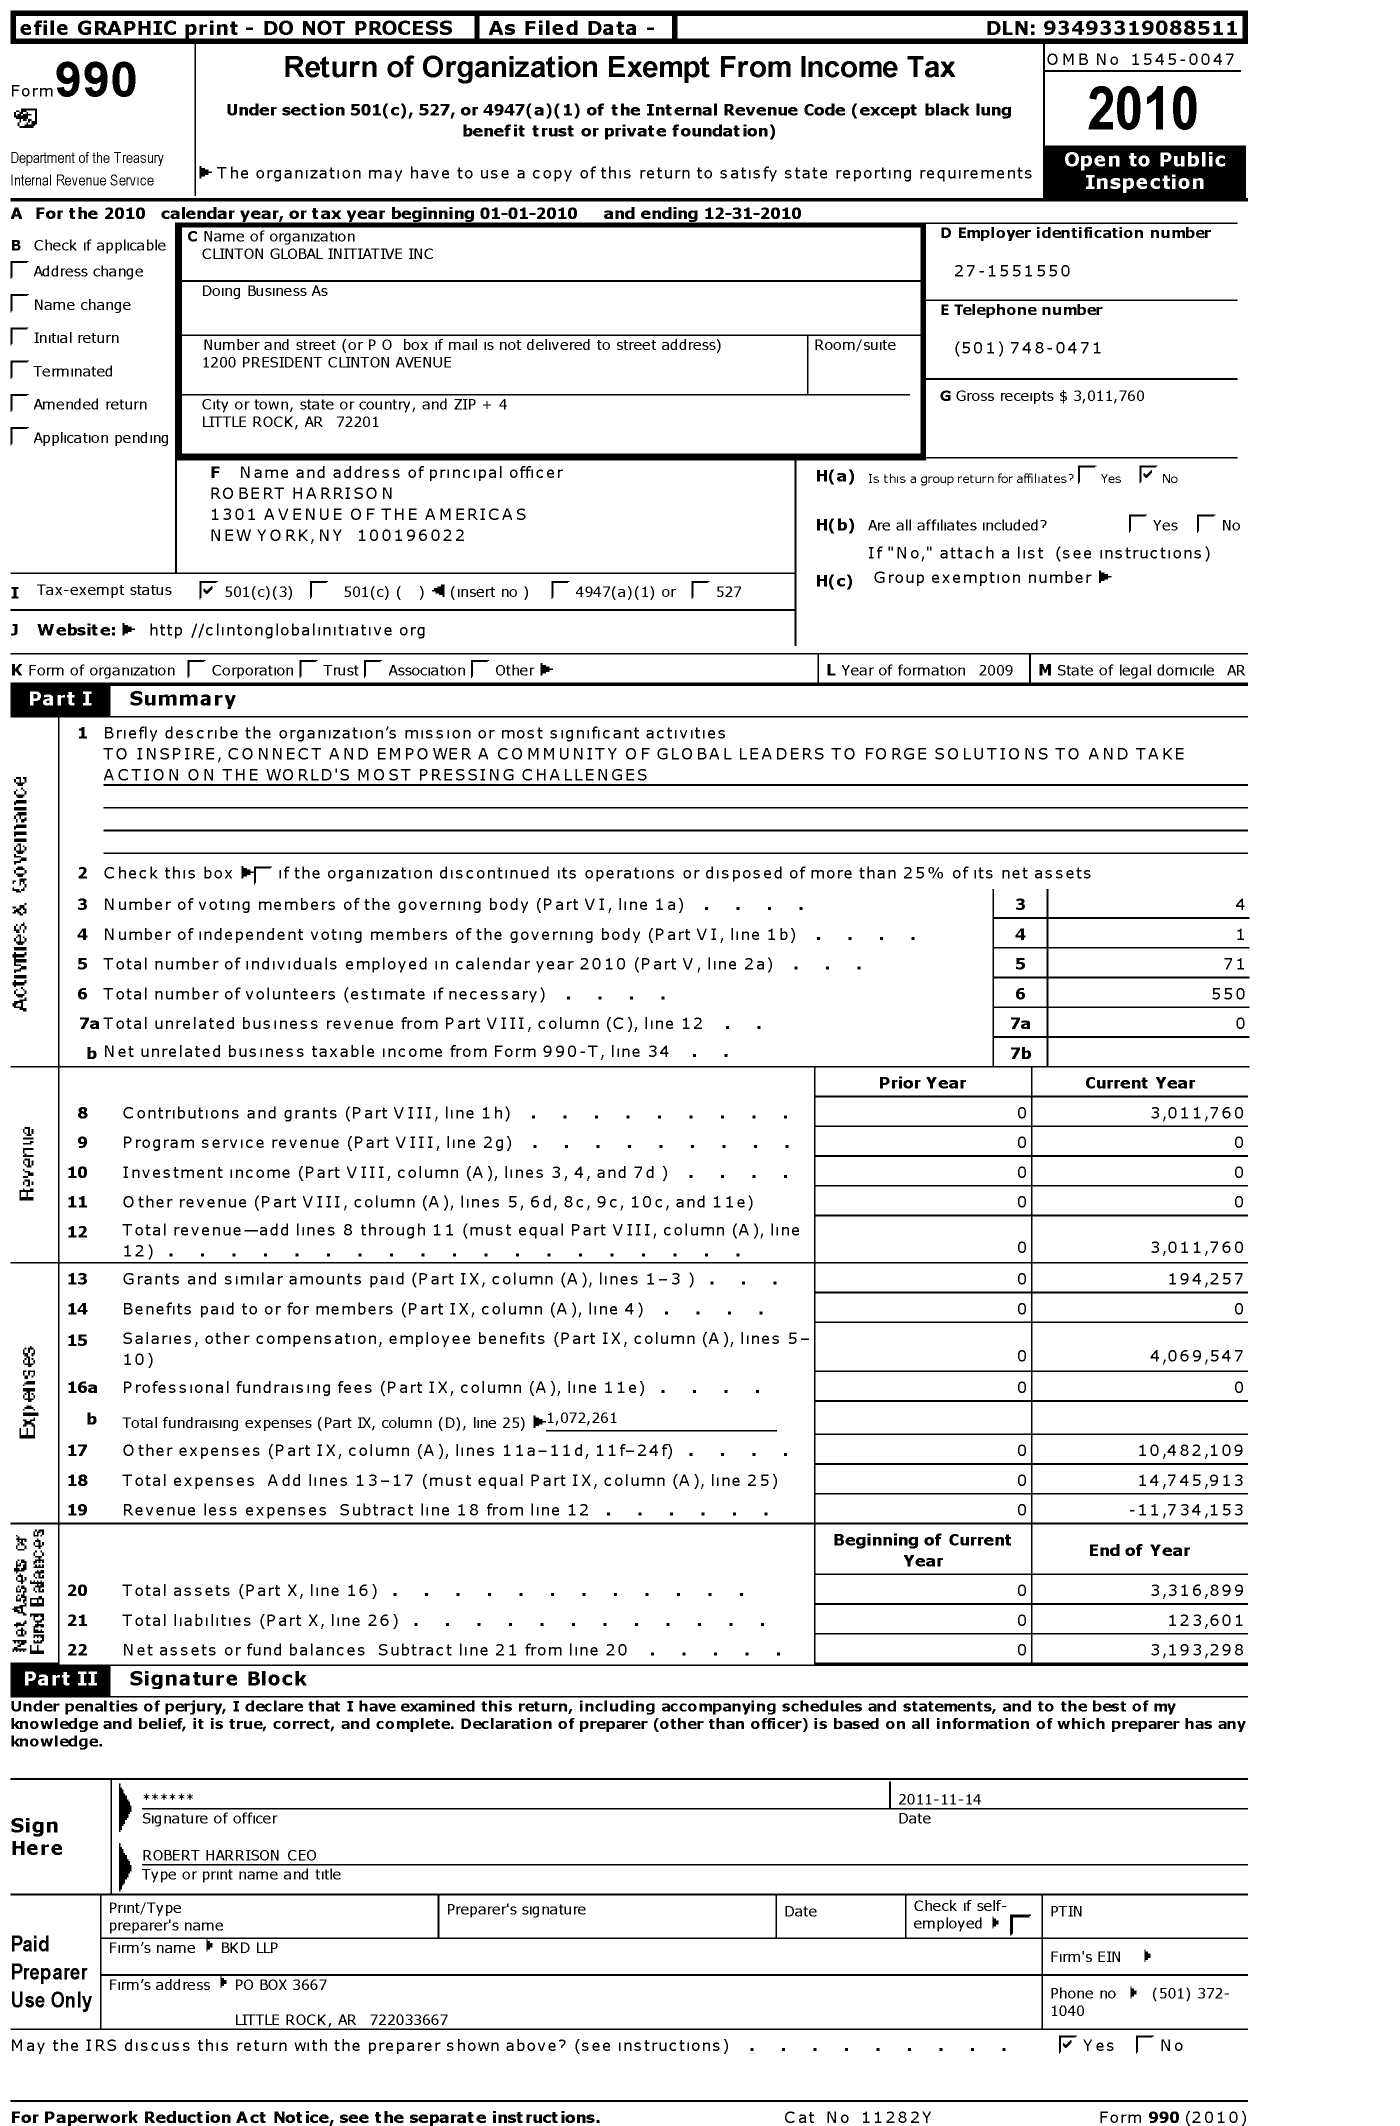 Image of first page of 2010 Form 990 for Clinton Global Initiative (CGI)